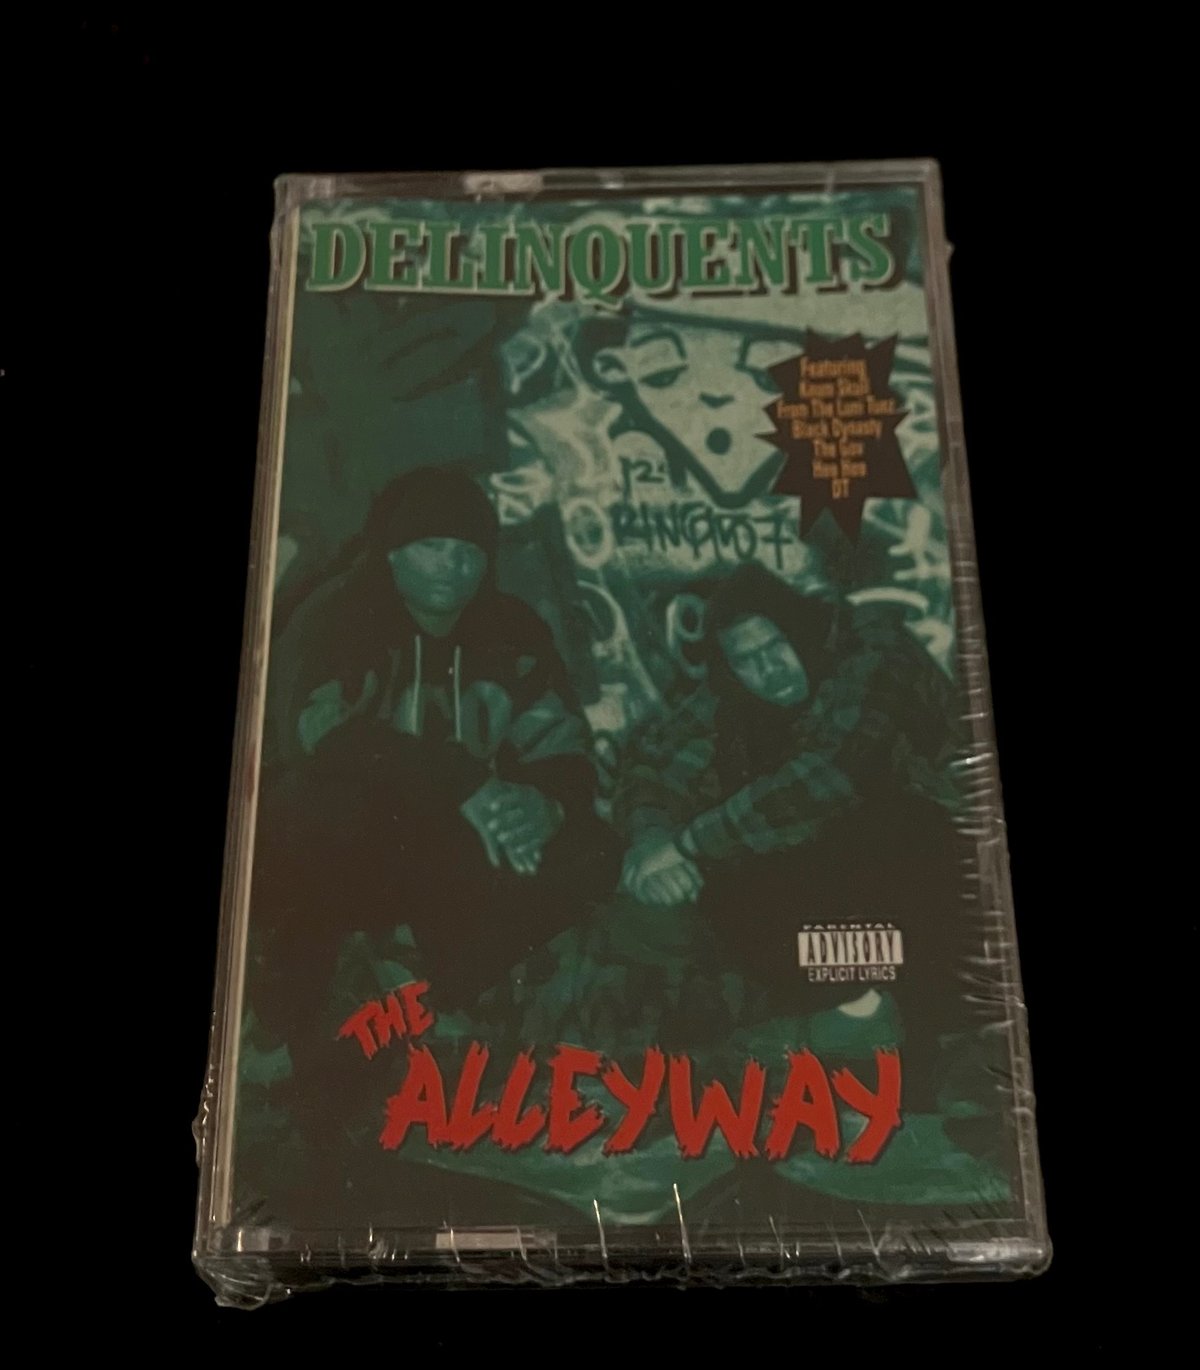 Image of Delinquents “THE ALLEYWAY” 